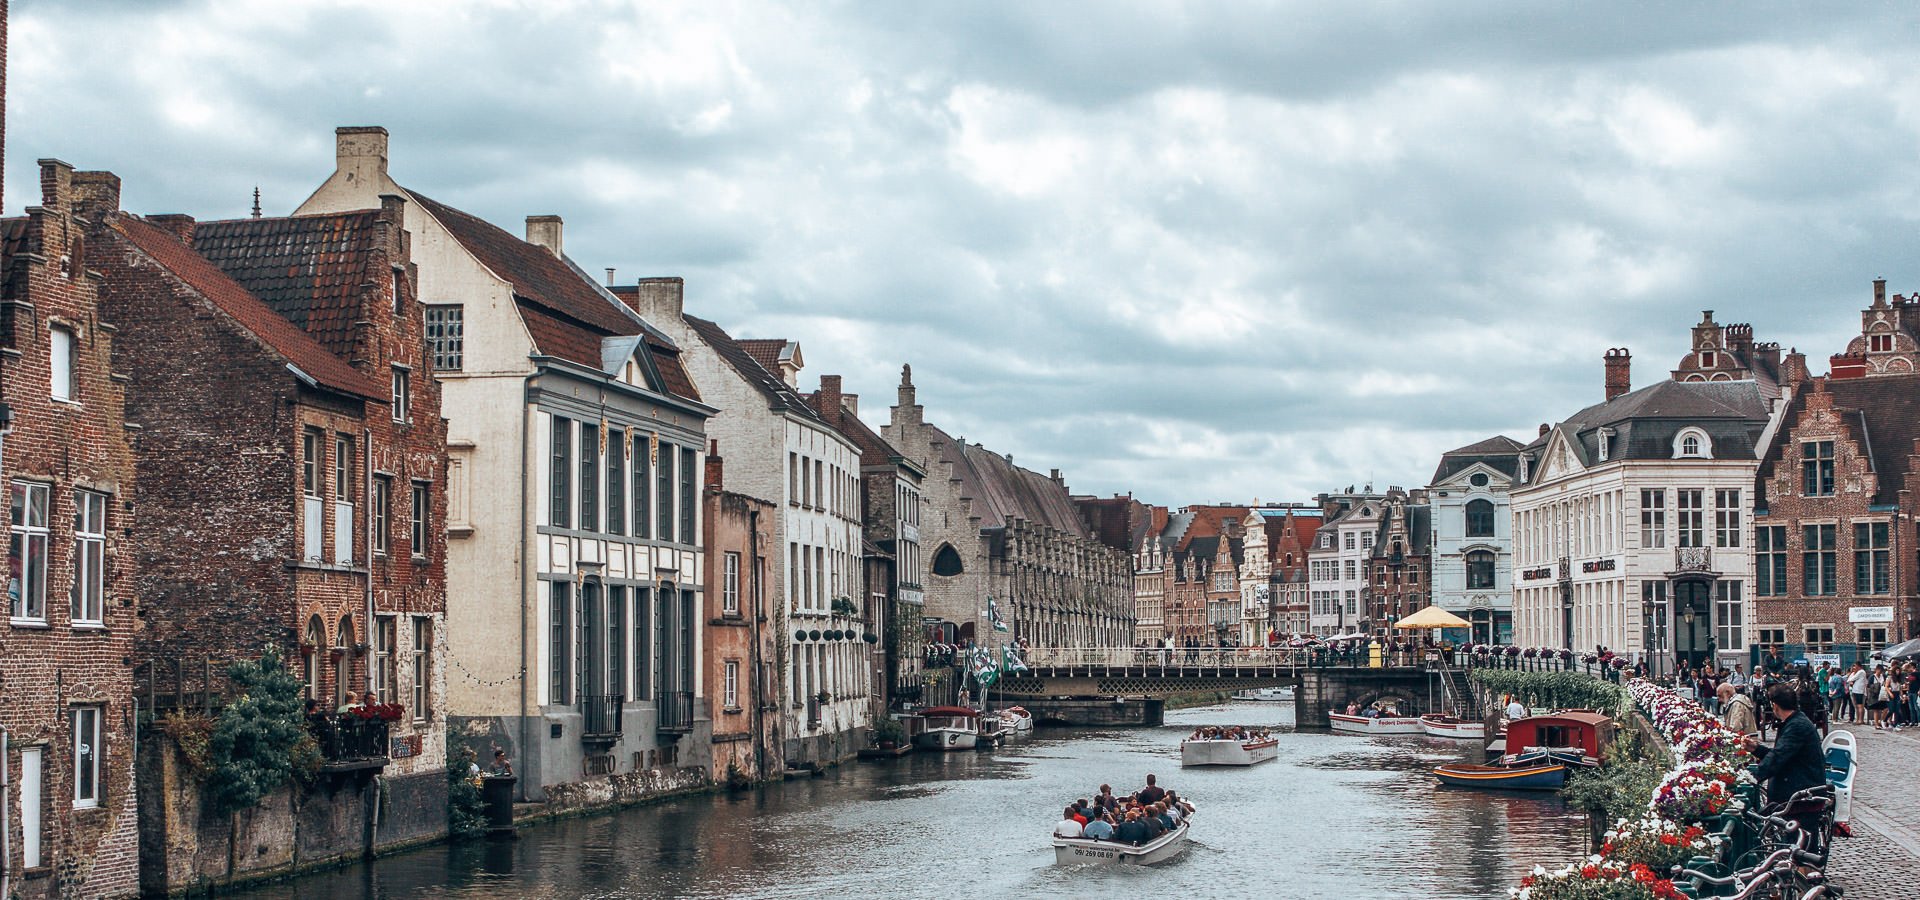 The Undiscovered Flemish Jewel: A Day Trip To Ghent | 24 hours in bruges 2